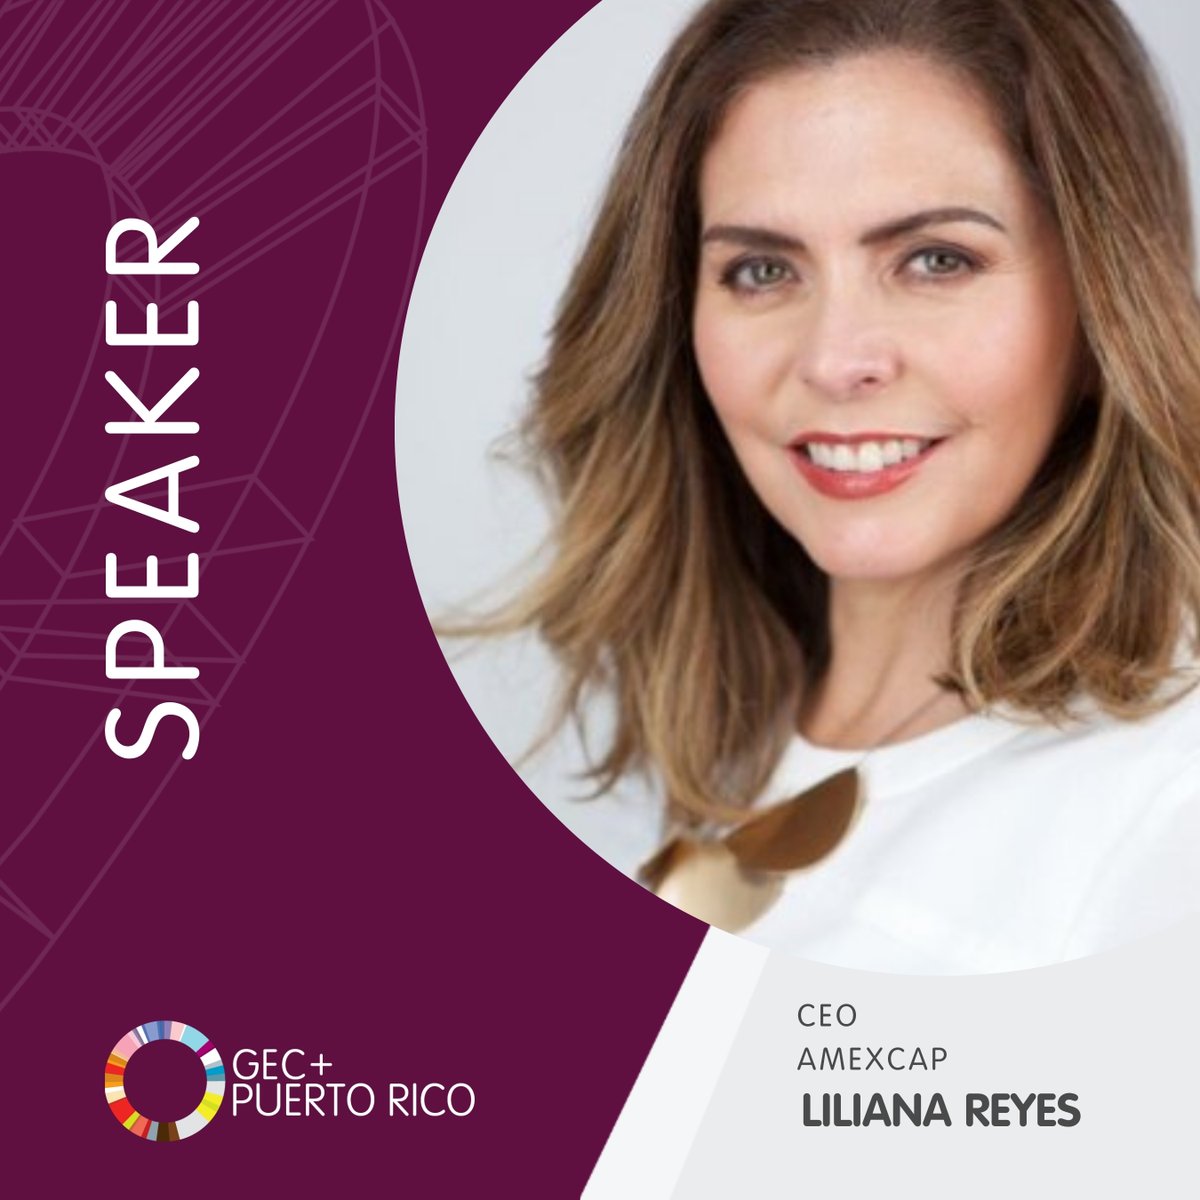 Liliana Reyes, CEO of @AMEXCAP, will be at GEC+Puerto Rico for transformative conversations to drive positive change and innovation across investment landscape. Join us July 15-18: genglobal.org/gec-plus/puert… #GECPlusPR #startup #entrepreneur #innovation